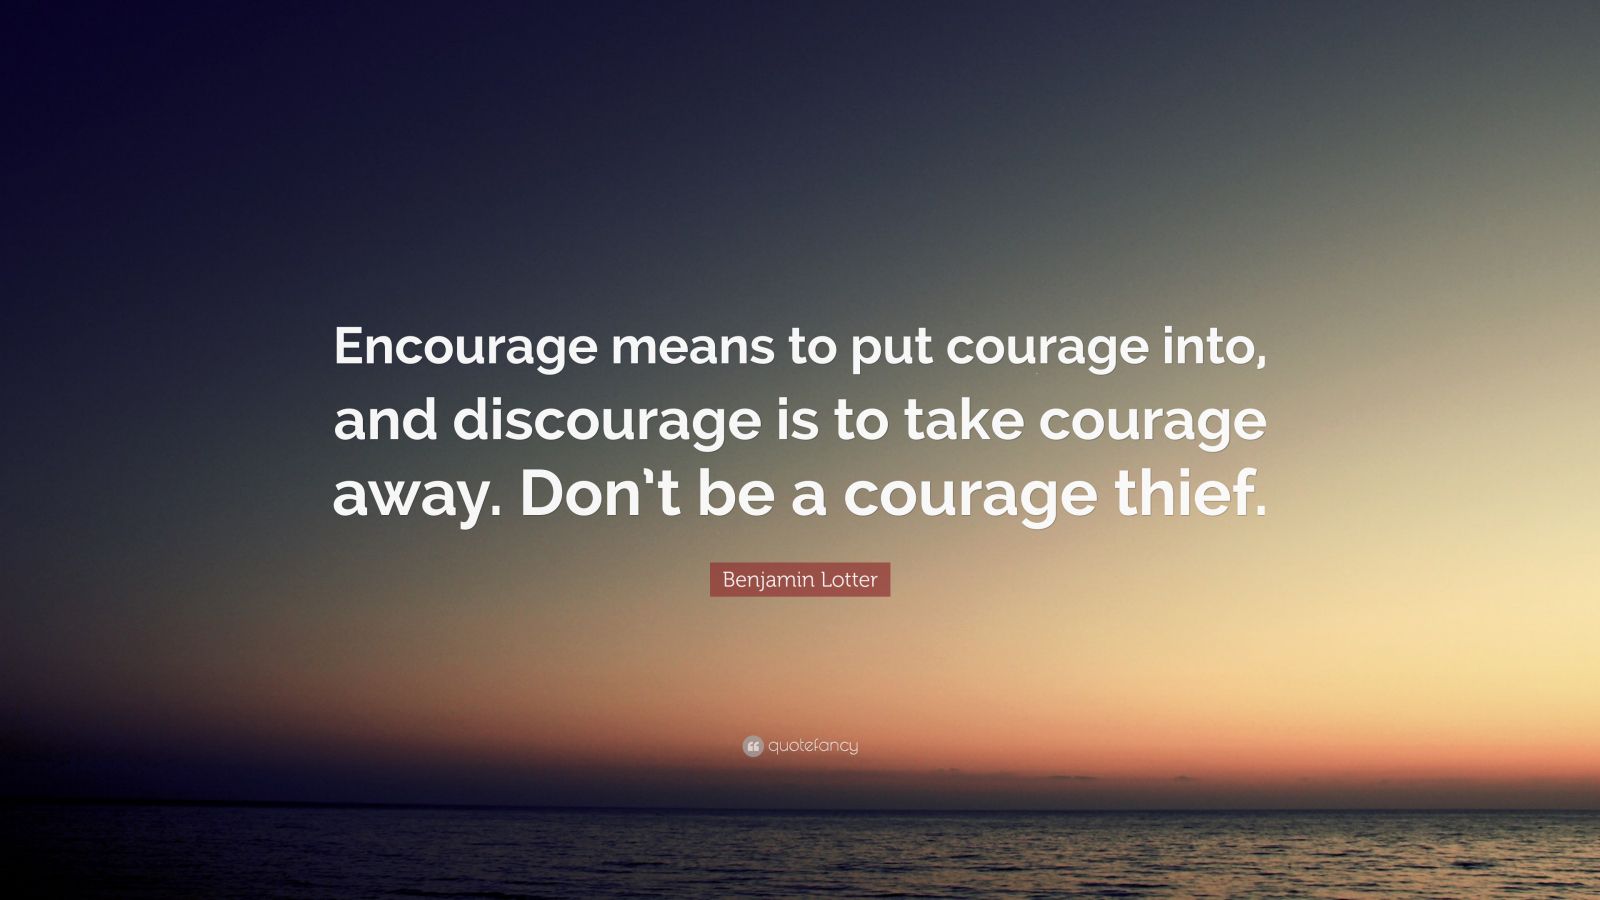 Benjamin Lotter Quote: “Encourage means to put courage into, and ...